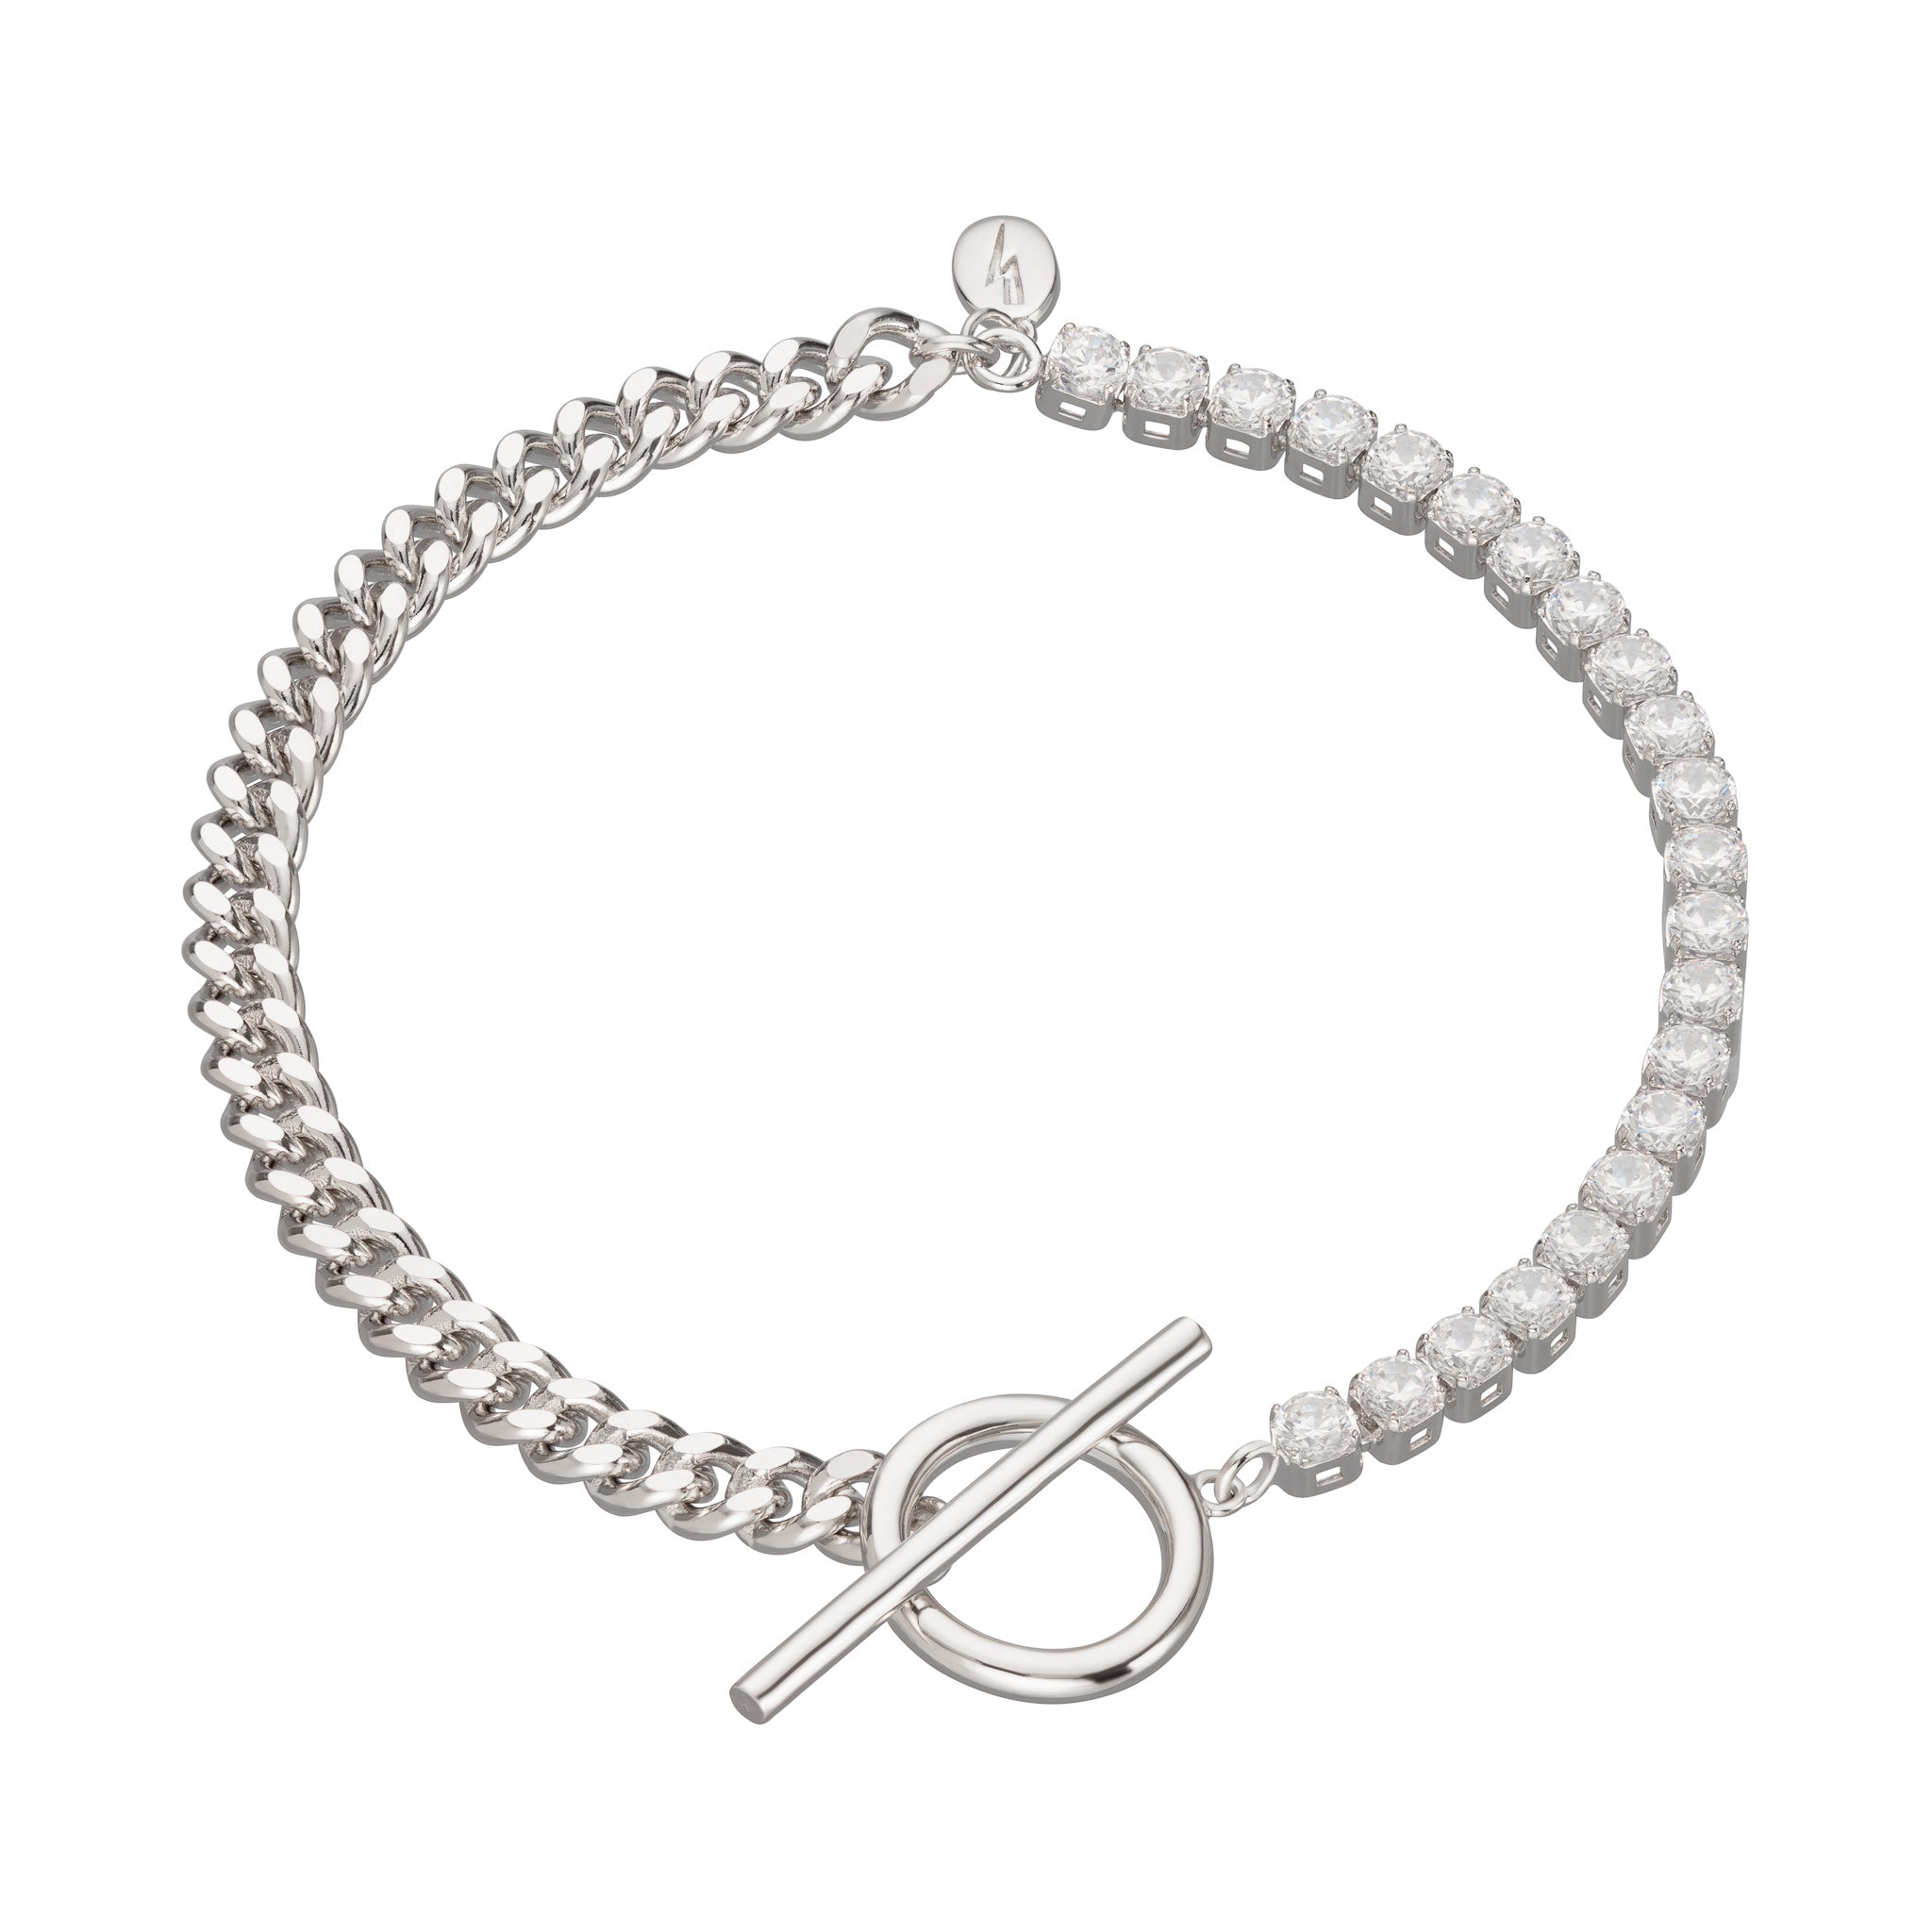 Tennis and Curb Chain Bracelet with T-Bar Clasp by Scream Pretty